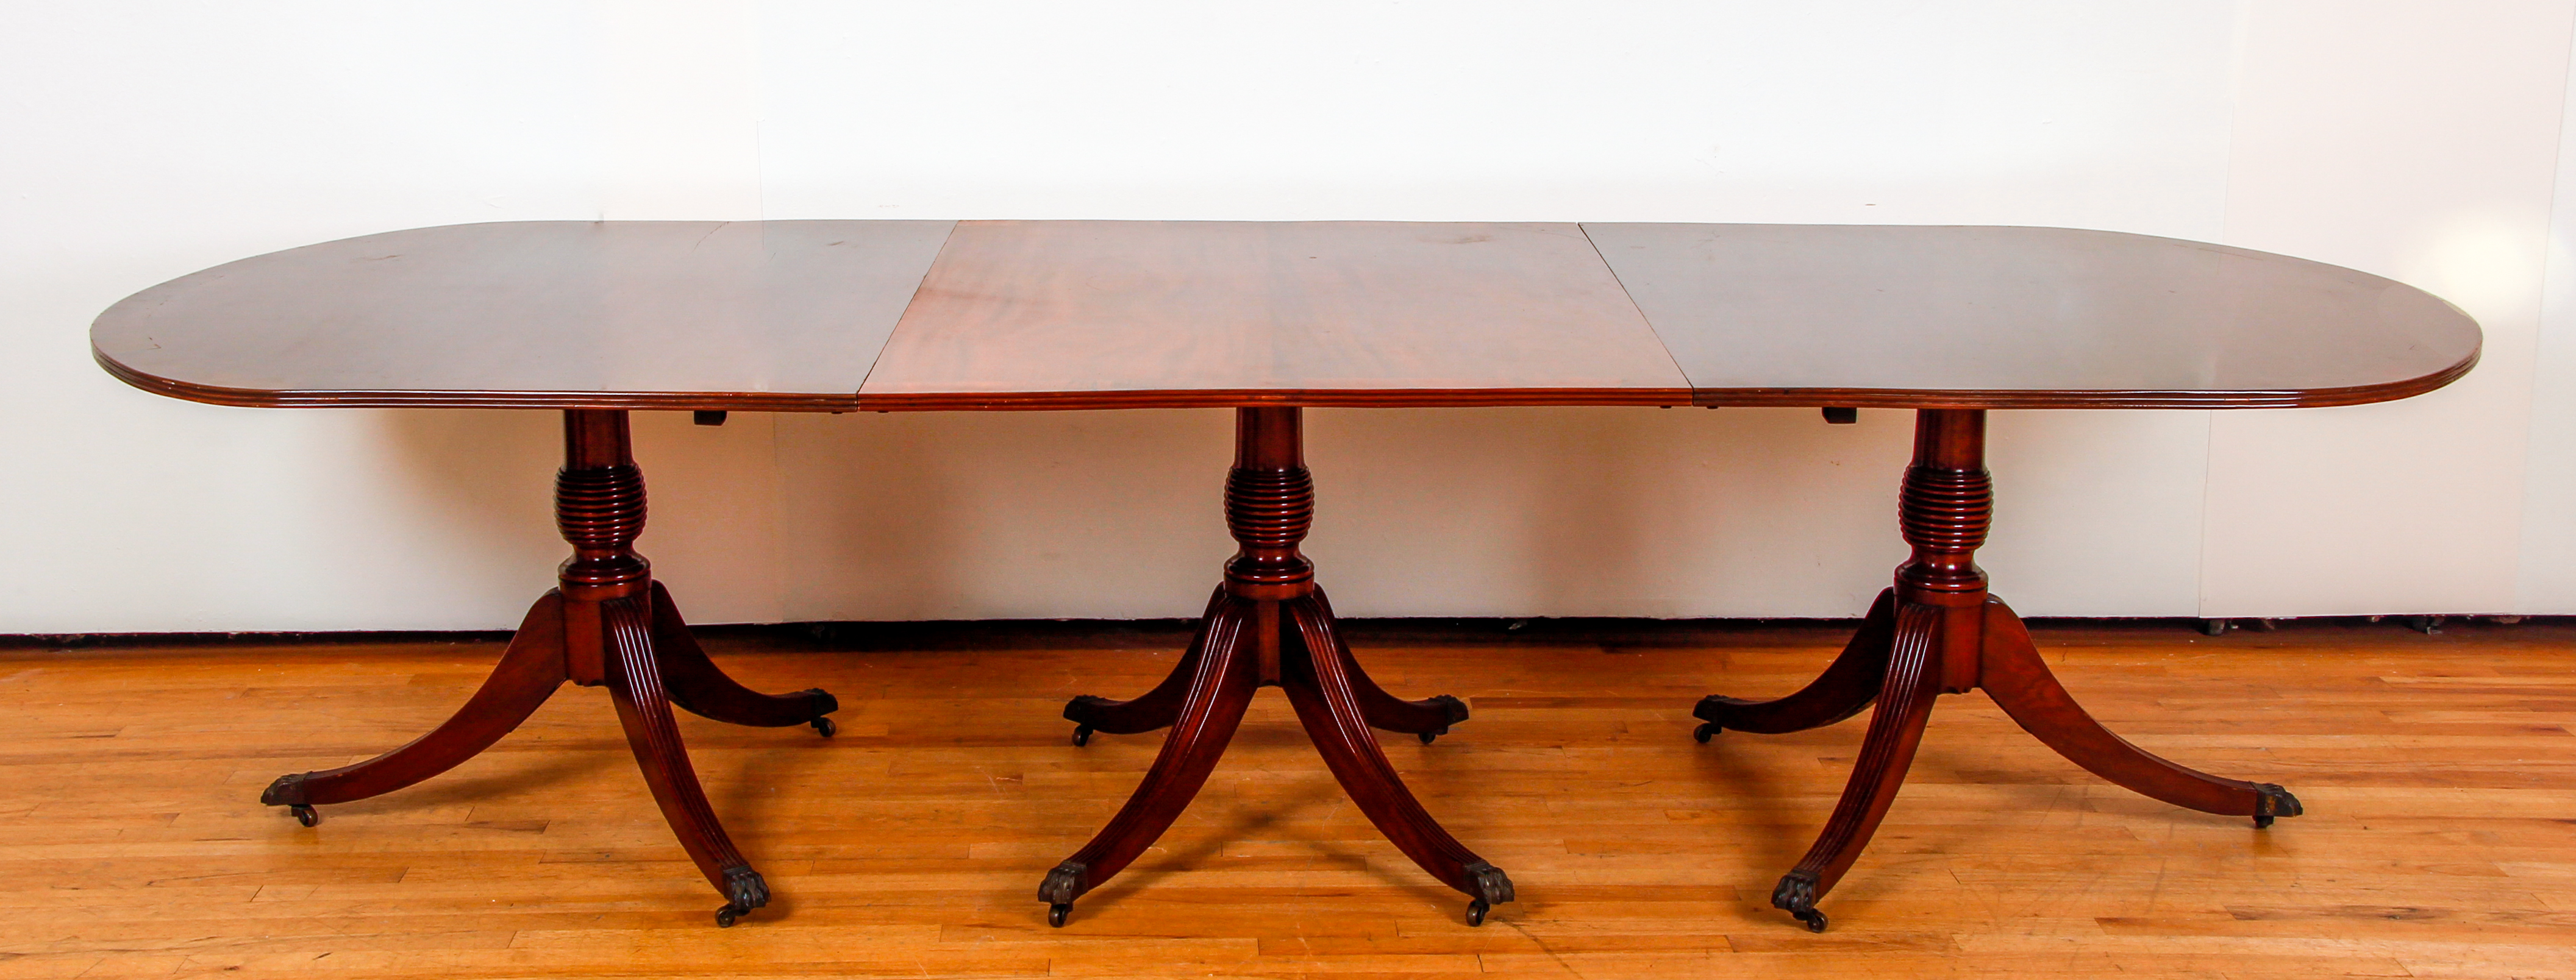 Duncan Phyfe Style triple pedestal dining table - Image 2 of 8